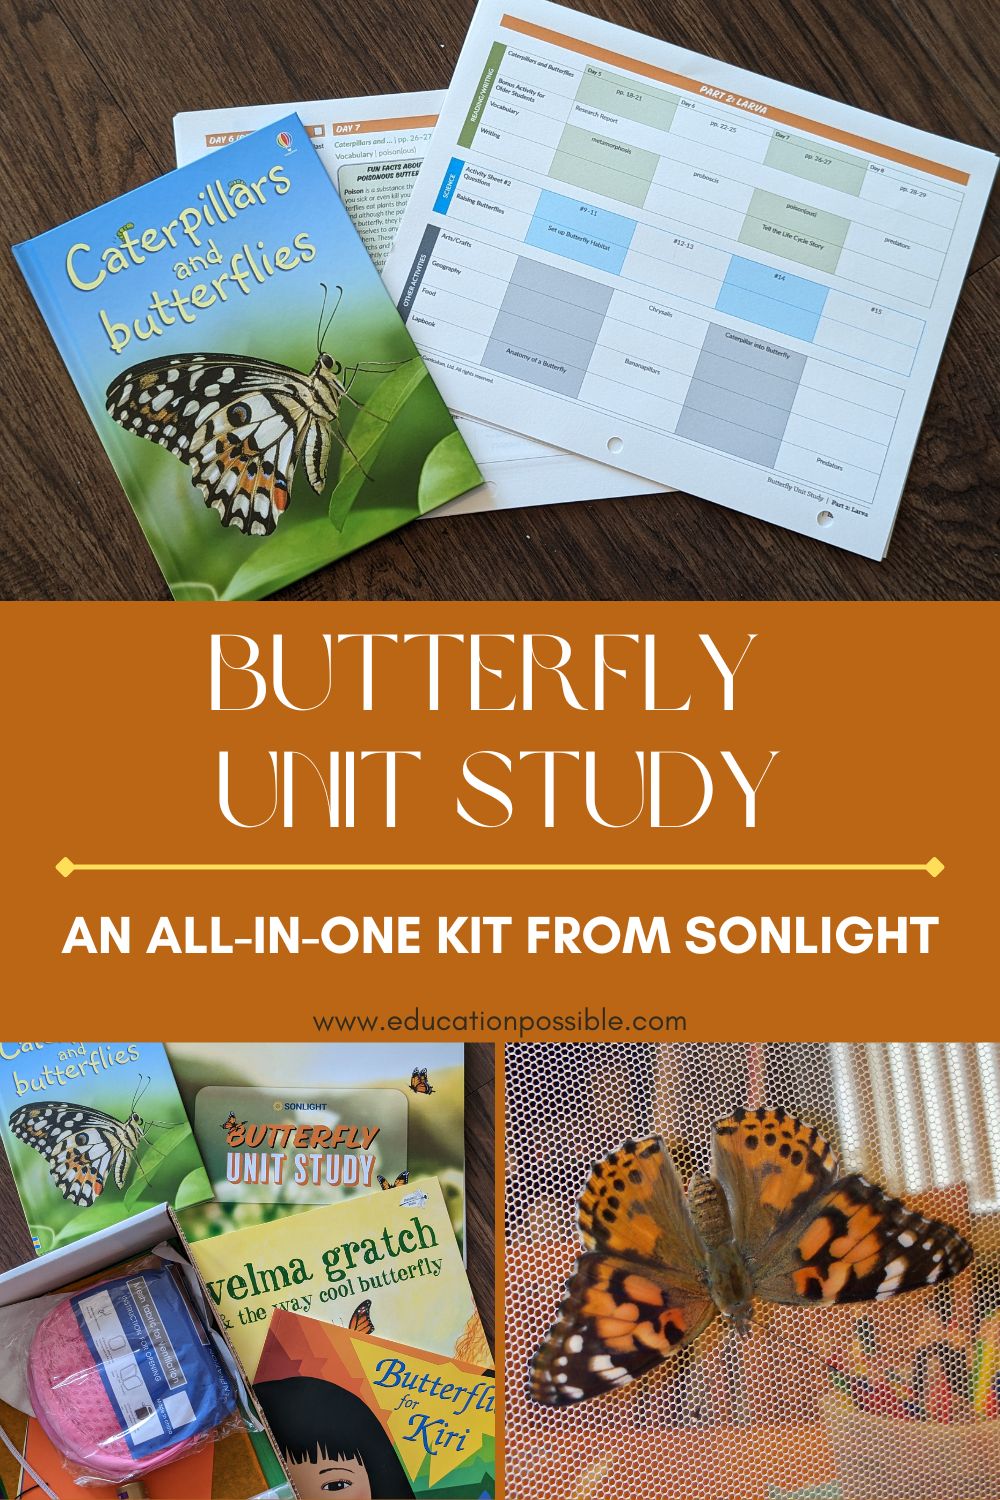 Collage of images from a butterfly unit study. Lesson plan, books, whole kit supplies, and butterfly on mesh.